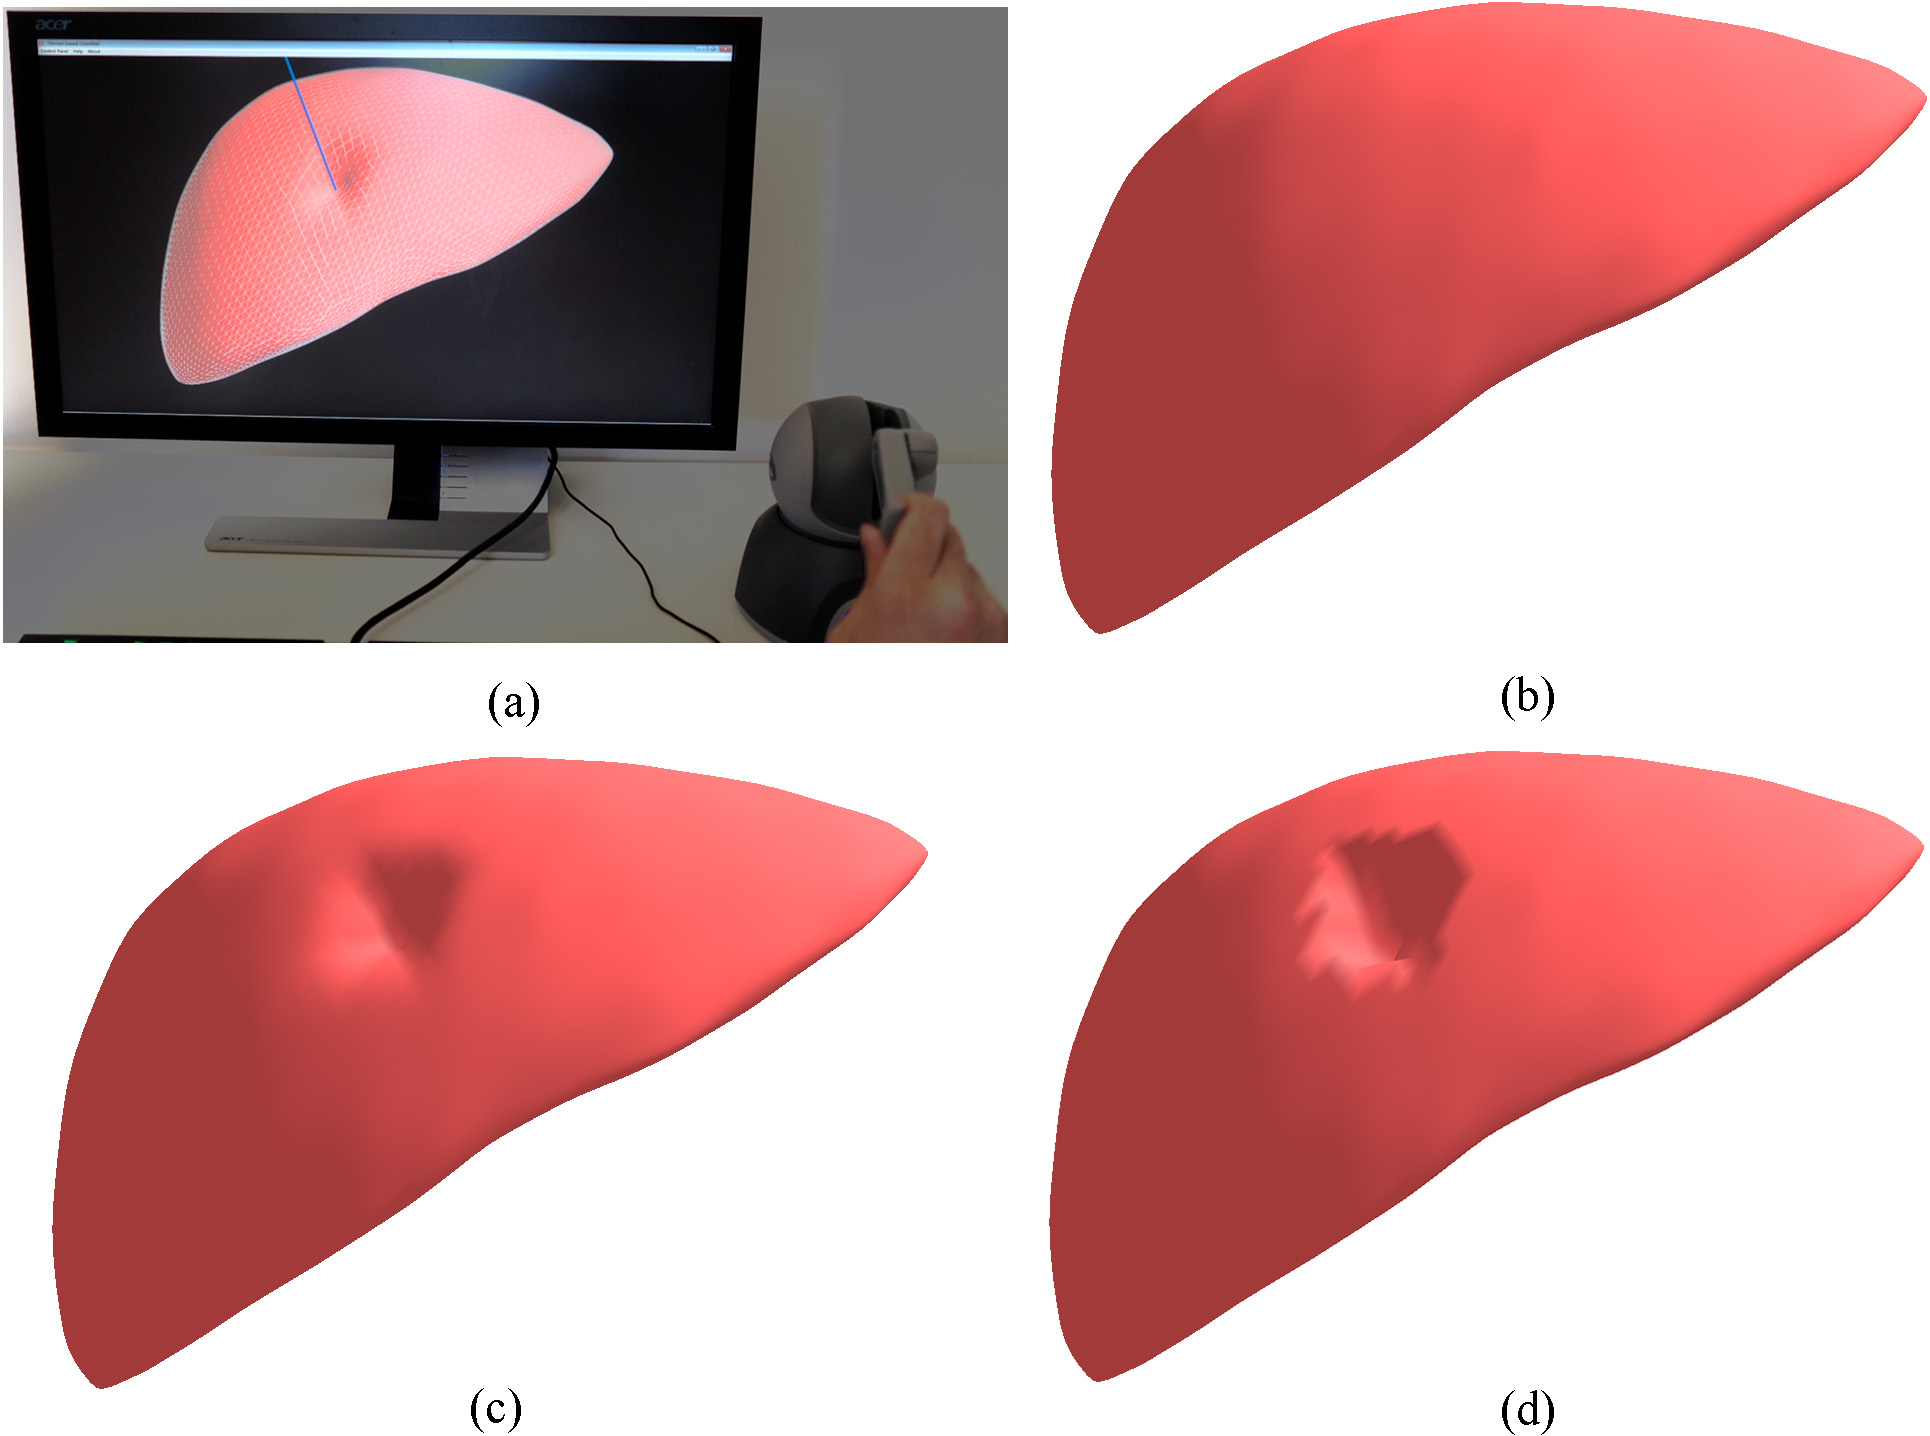 Interactive deformation of the human liver model: (a) the interactive simulation system; (b) the initial state of the volumetric liver model; (c) the deformation by the proposed CNN; (d) the deformation by the traditional ChainMail.